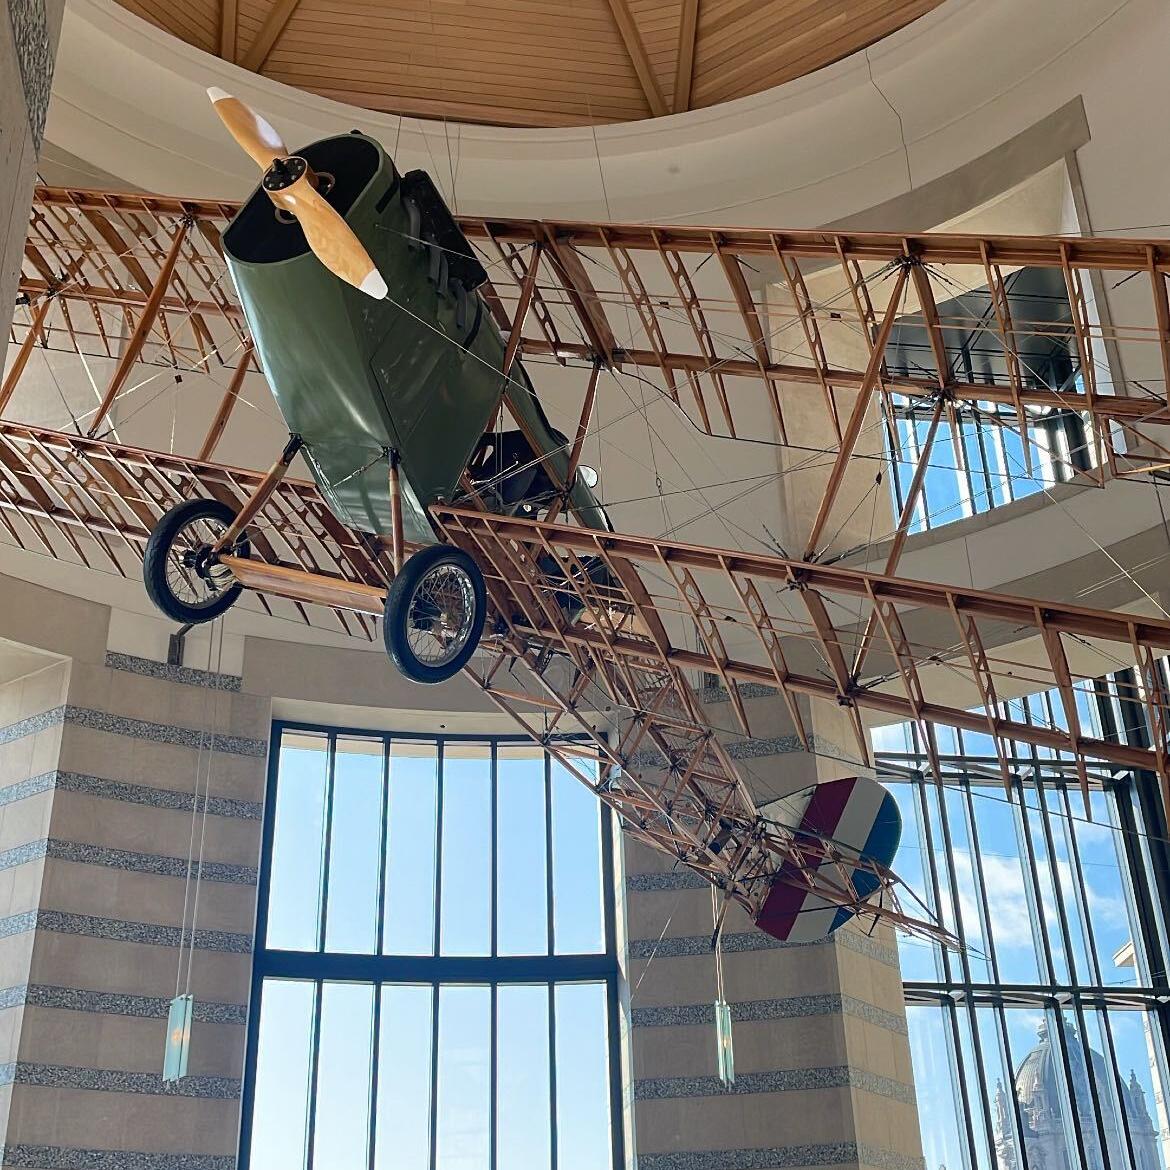 A photo of an old-school model plane hanging at the Minnesota History Center.